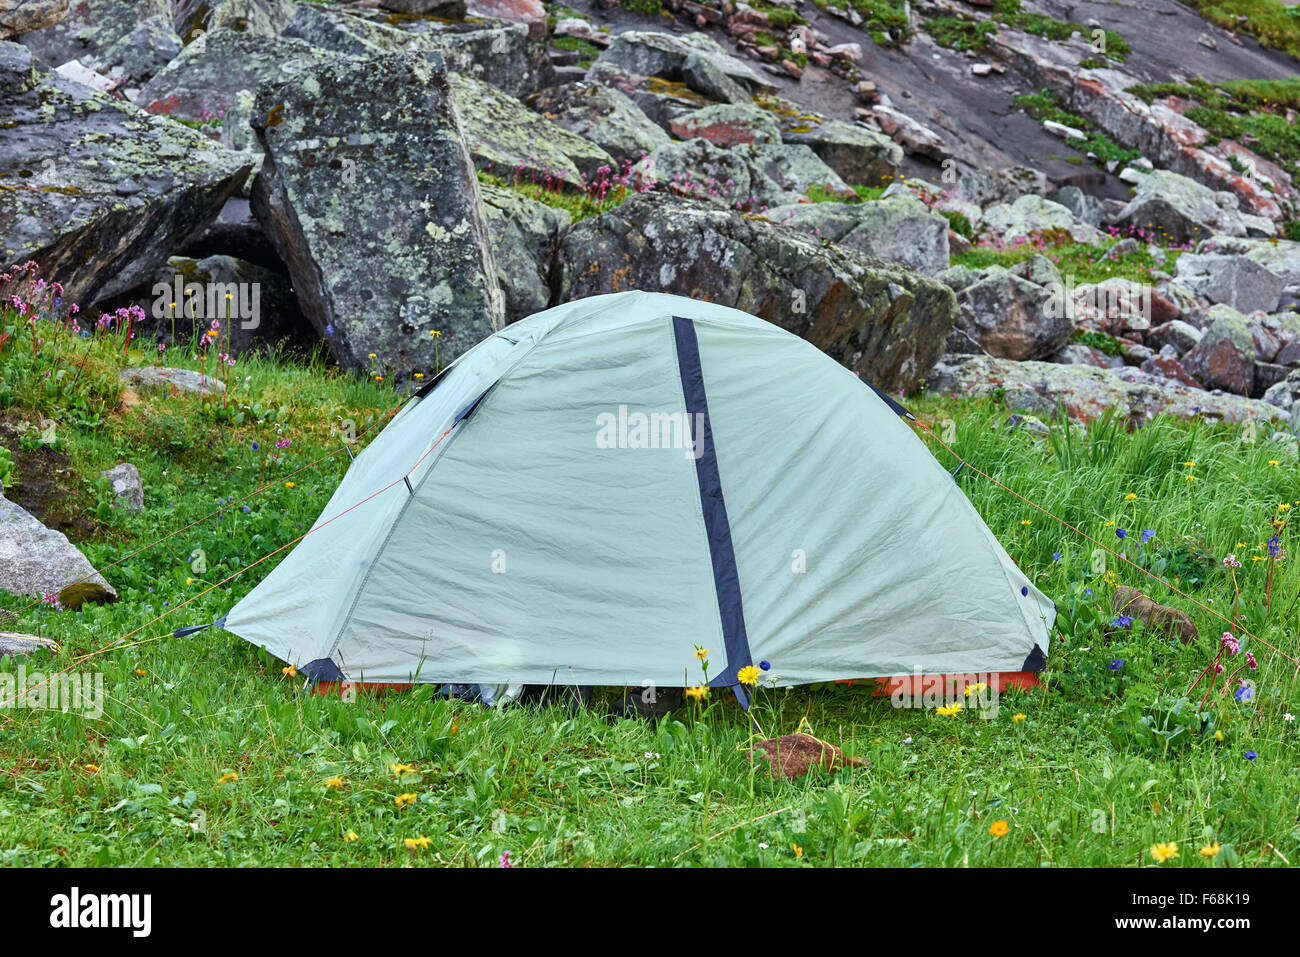 Lightweight hiking dome tent on the green grass Stock Photo